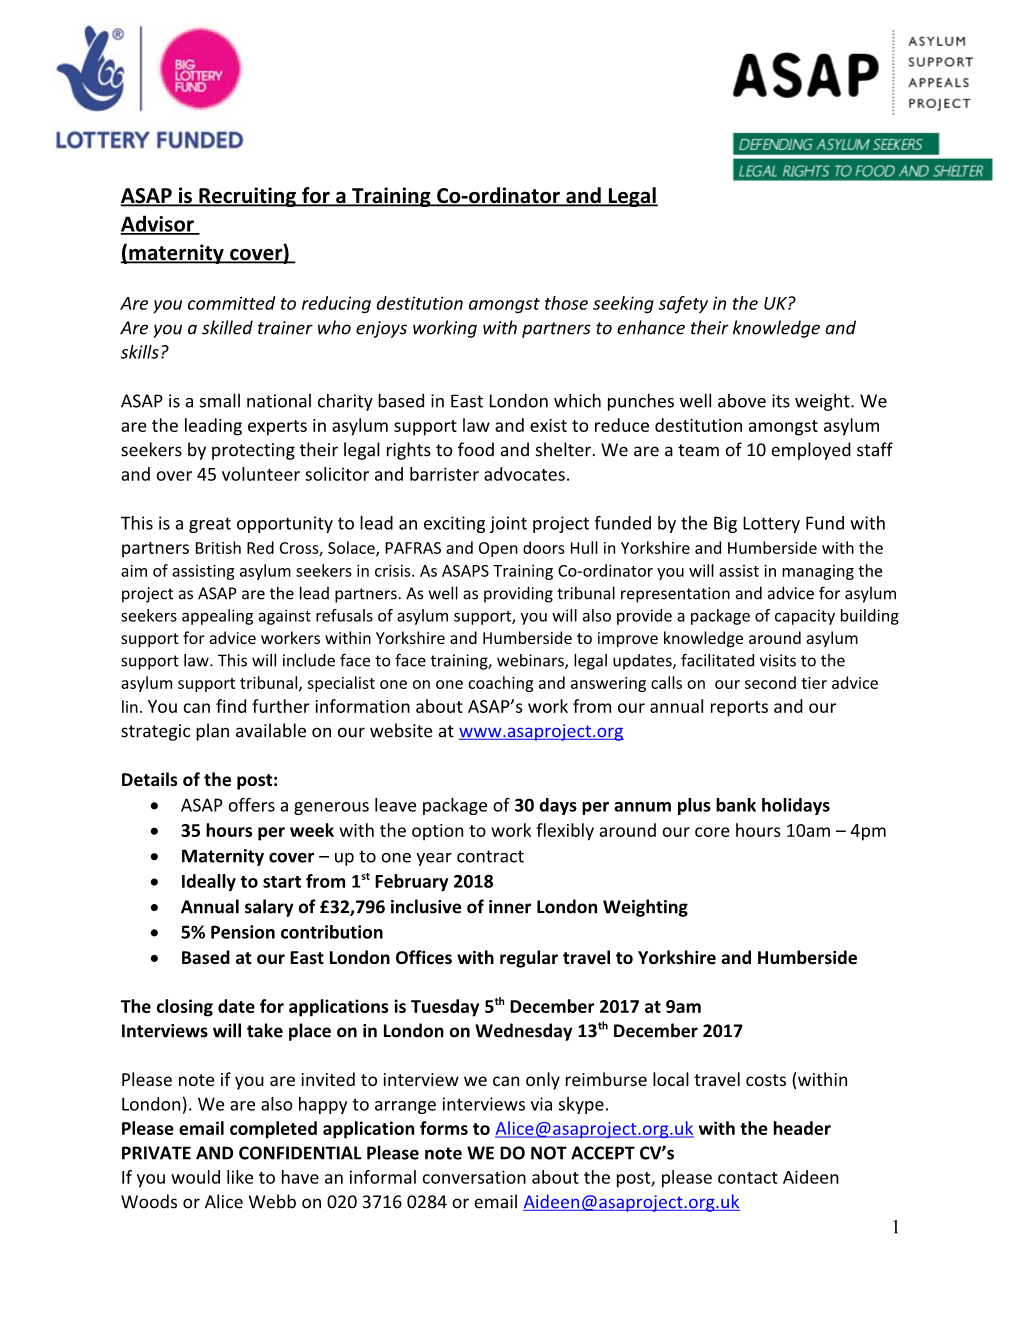 ASAP Is Recruiting for a Training Co-Ordinator and Legal Advisor